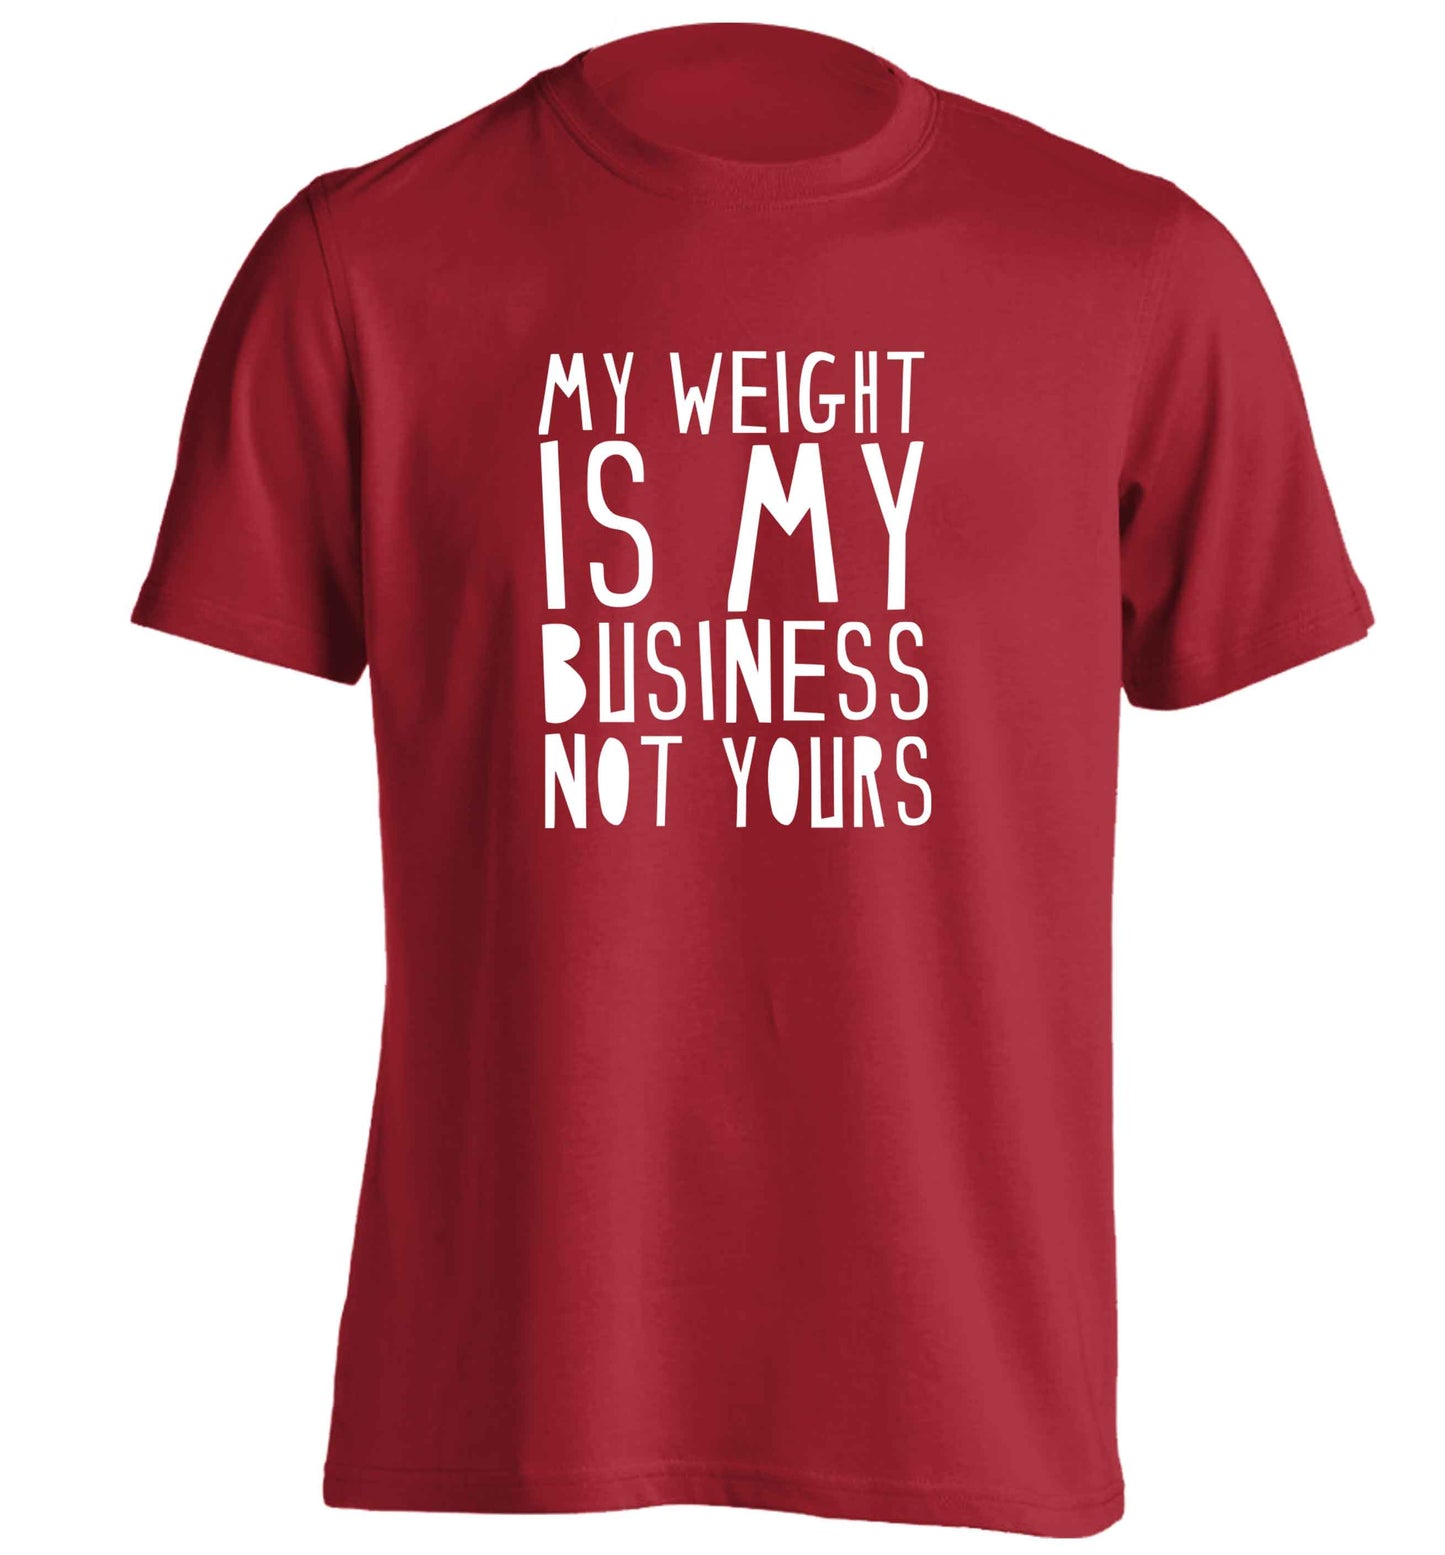 My weight is my business not yours adults unisex red Tshirt 2XL